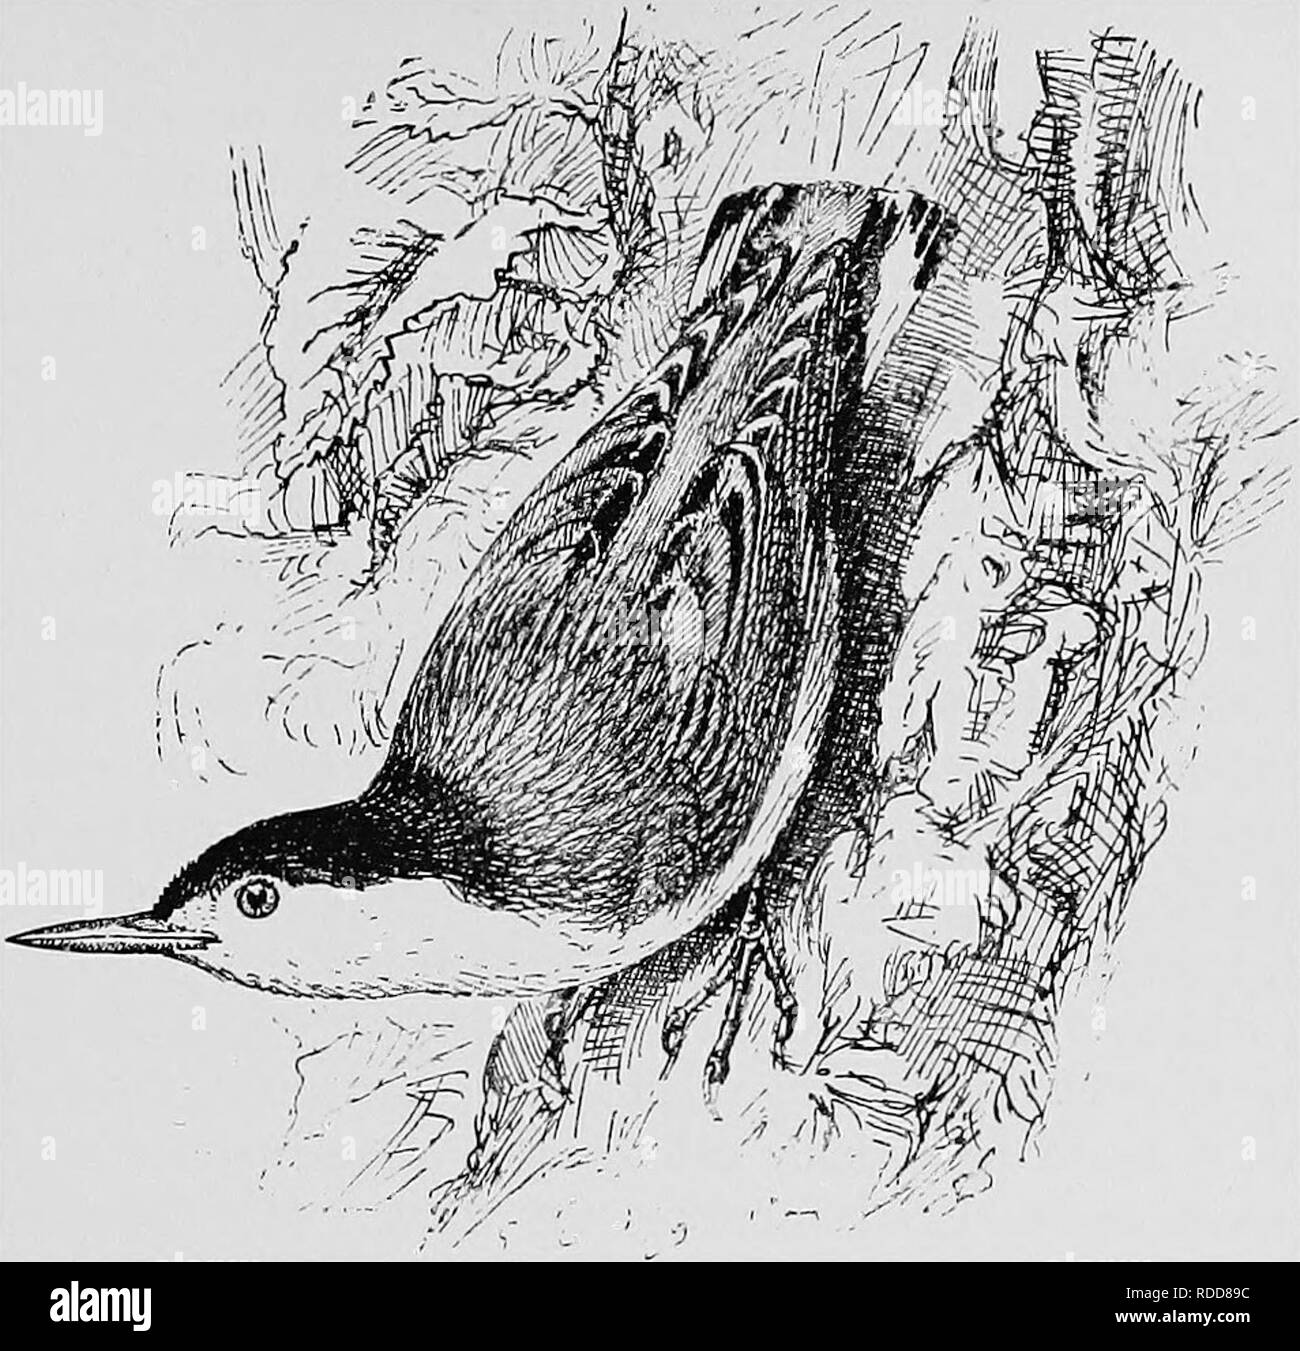 . A popular handbook of the ornithology of the United States and Canada, based on Nuttall's Manual. Birds; Birds. WHITE-BREASTED NUTHATCH. SiTTA CAROLINENSIS. Char. Above, bluish ash; top of head and neck black; wings black, blue, and white; tail black, marked with white; beneath, white; under tail-coverts reddish brown. Bill long and acute. Female and young similar, but black of head tinged with ashy or wanting. Length 5|^ inches. Nest. In open woodland, placed at the bottom of a cavity excavated in a dead tree or stump, â sometimes an old woodpecker's nest is used; made of leaves, grass, fea Stock Photo